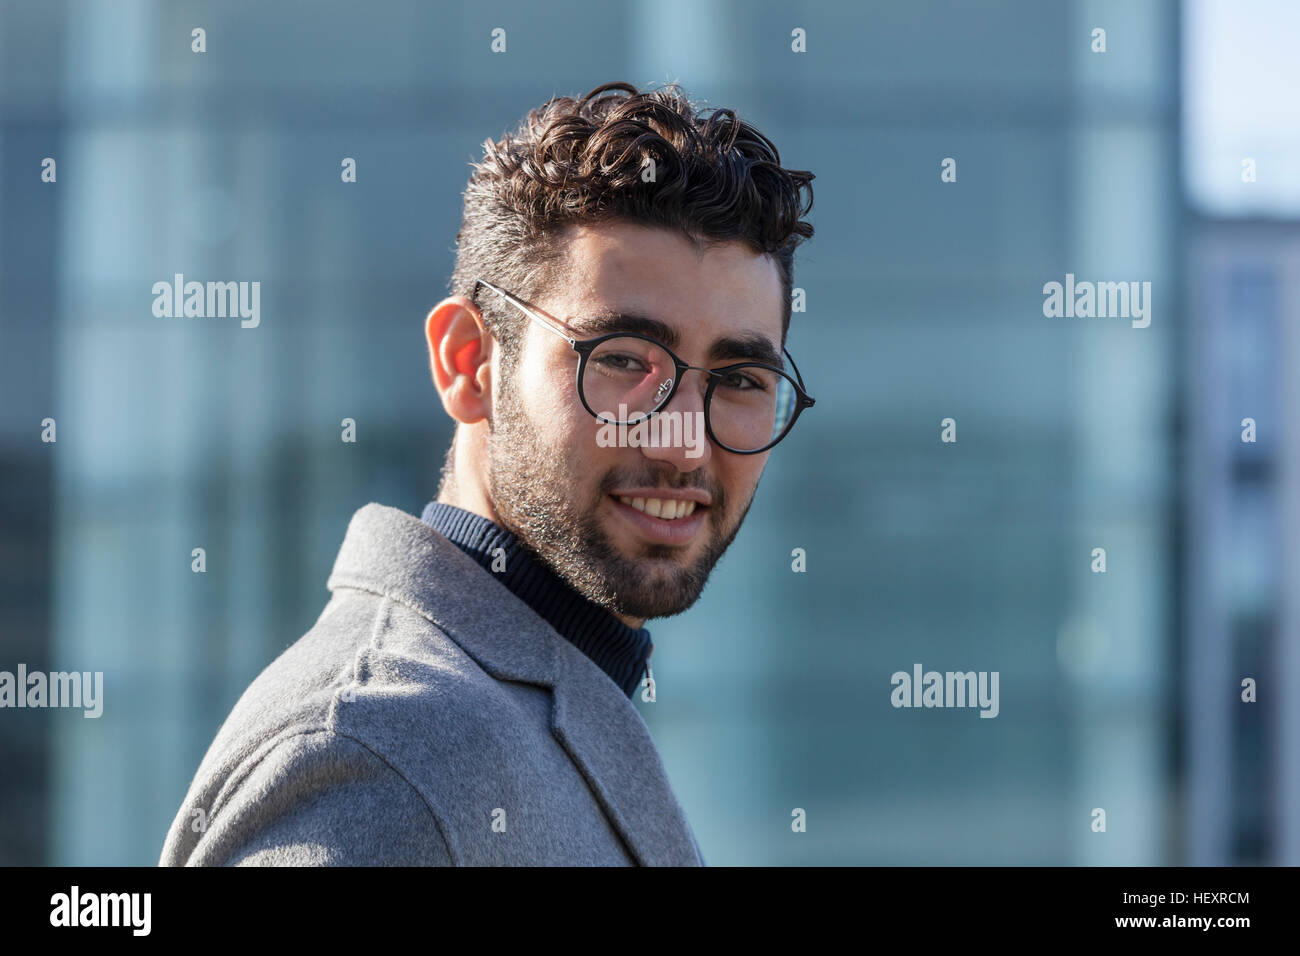 Portrait of smiling young businessman with beard and spectacles Stock Photo